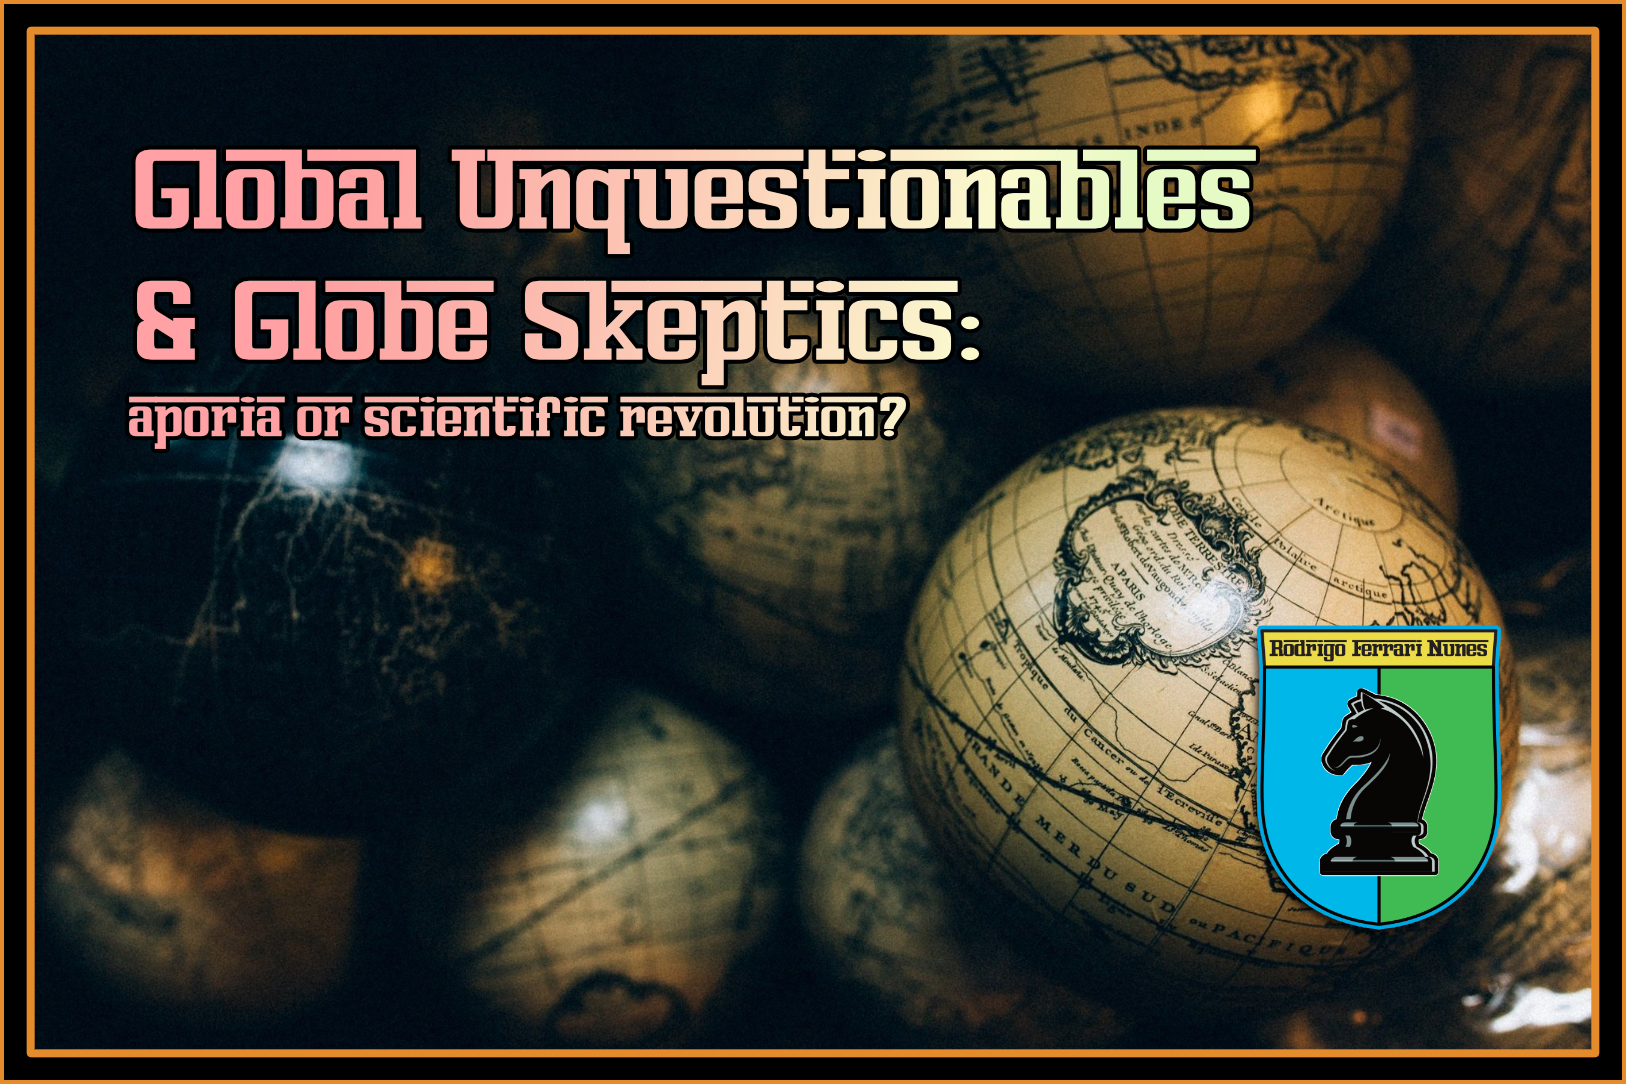 Global Unquestionables and Globe Skeptics: Live from a Professional Anthropology Conference